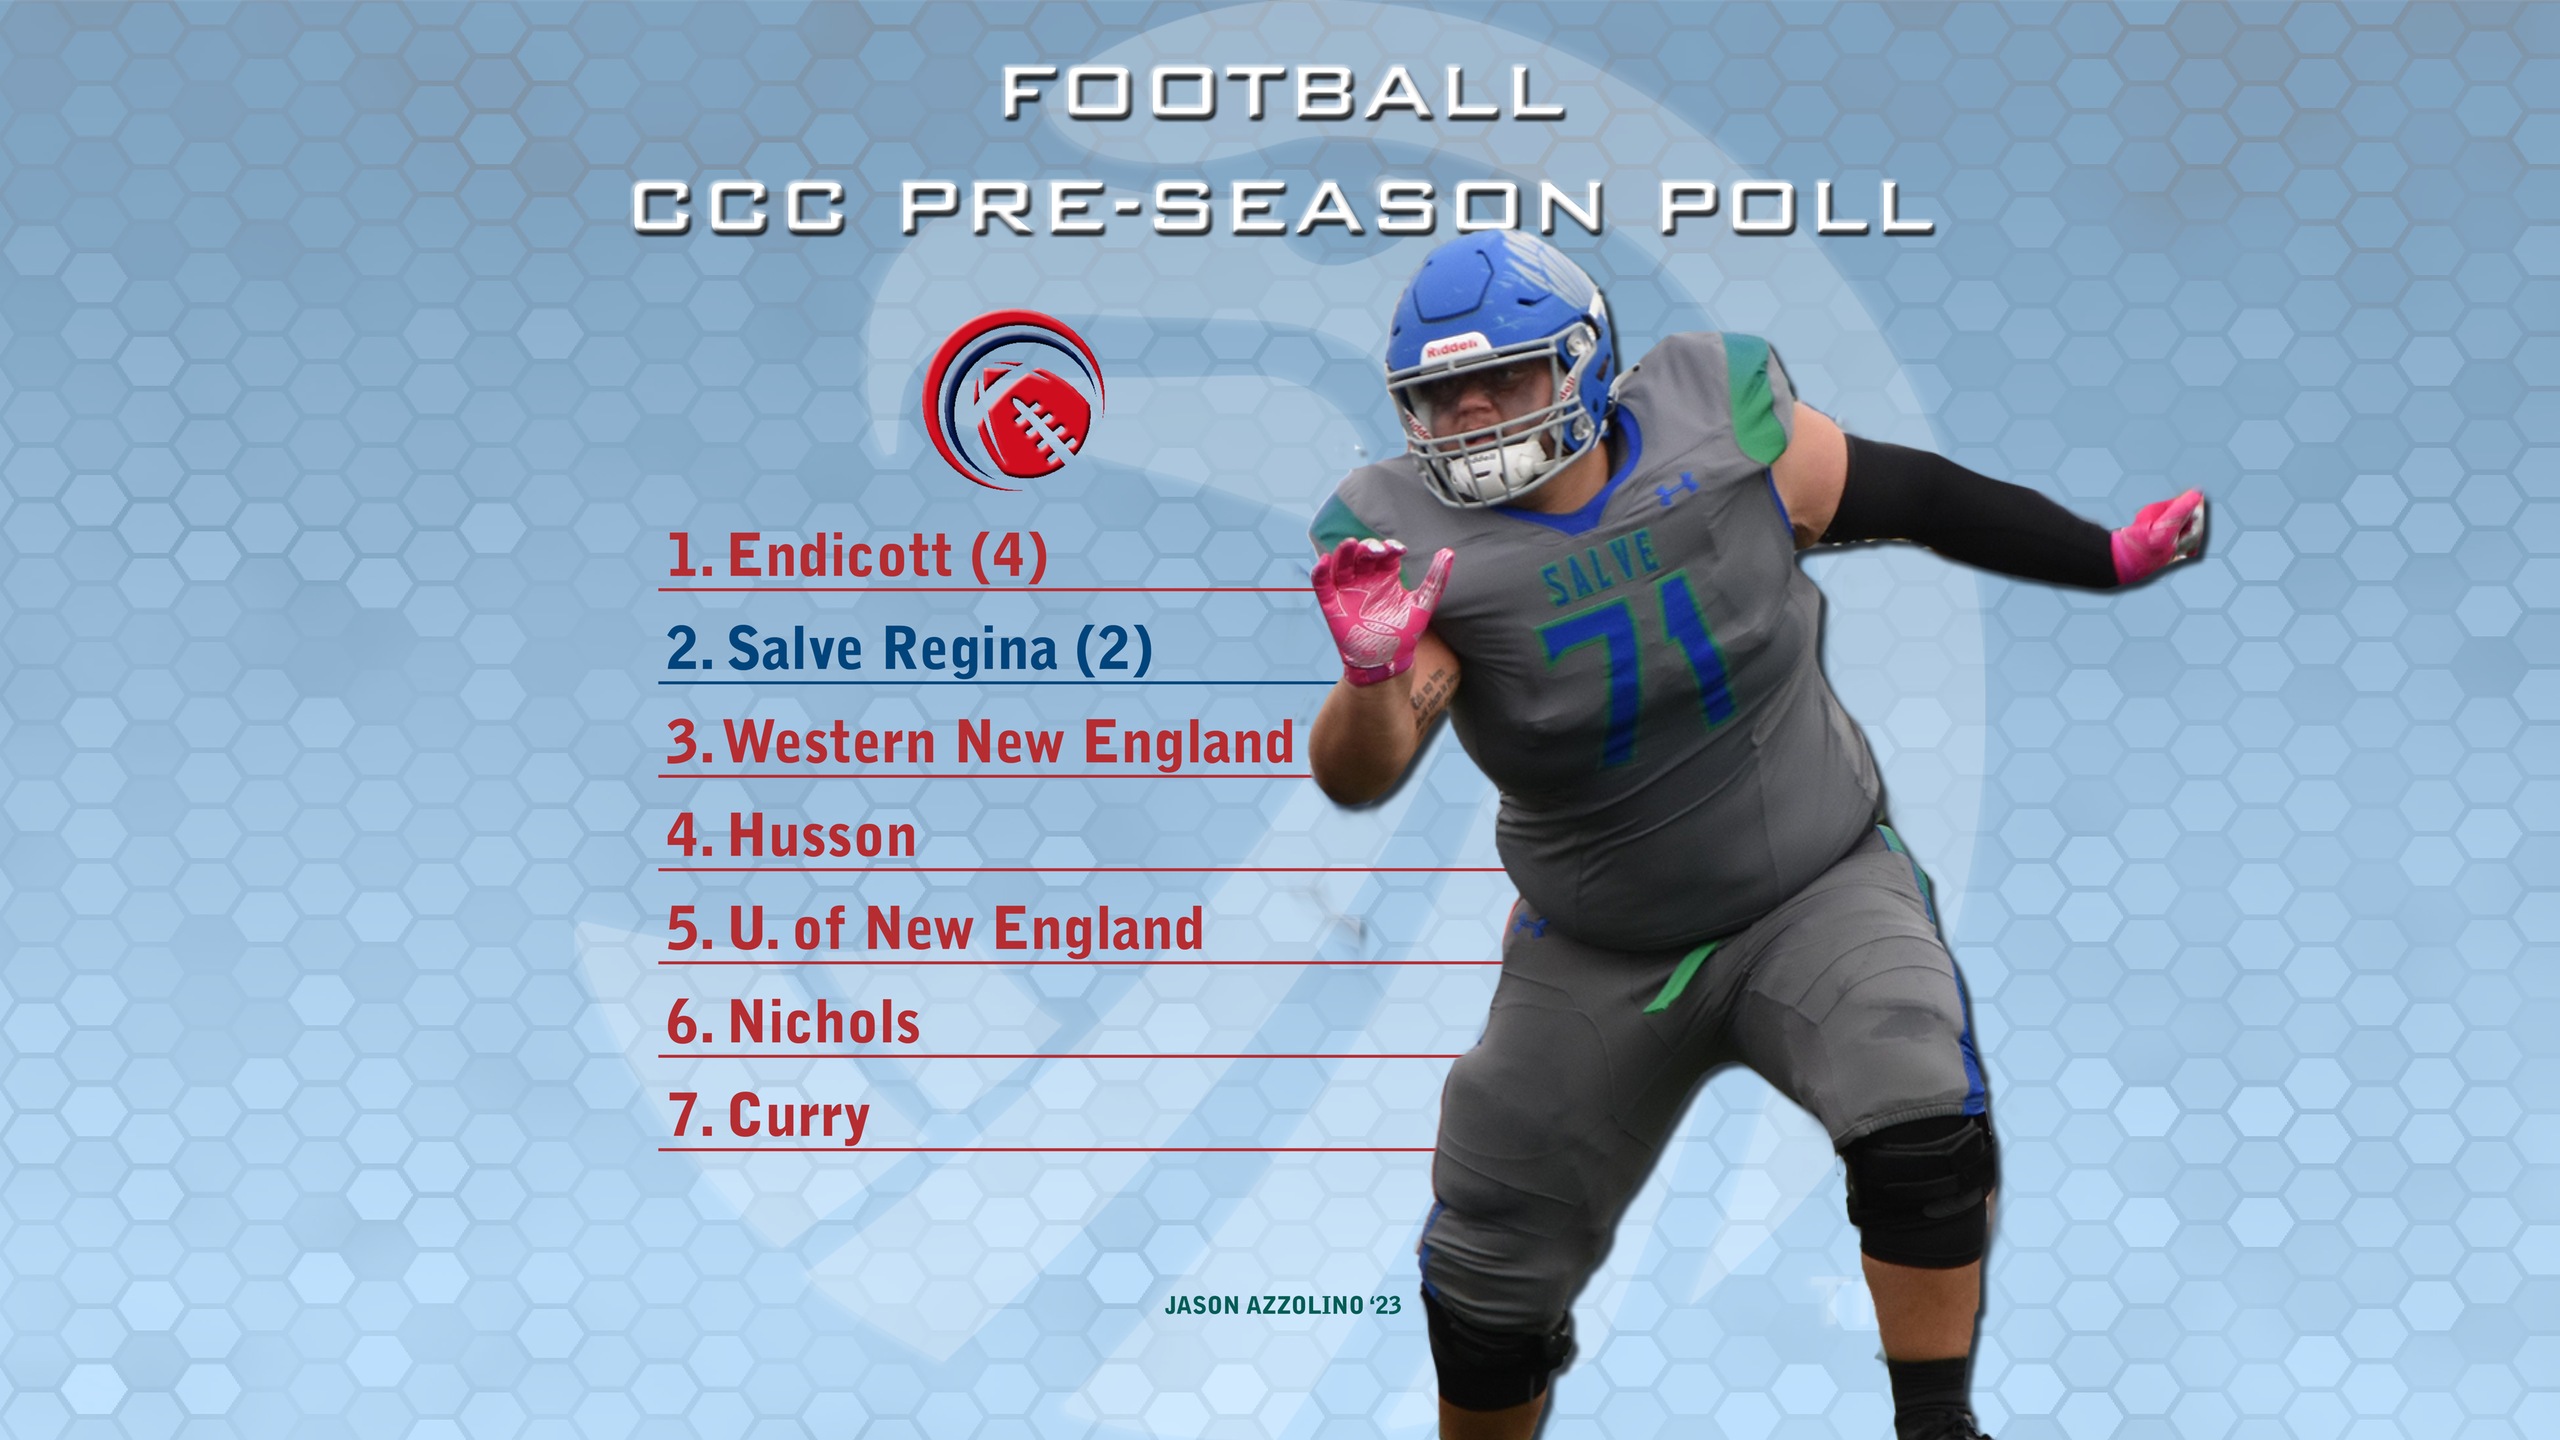 Jason Azzolino and the Seahawks were picked to finish second by the CCC coaches.